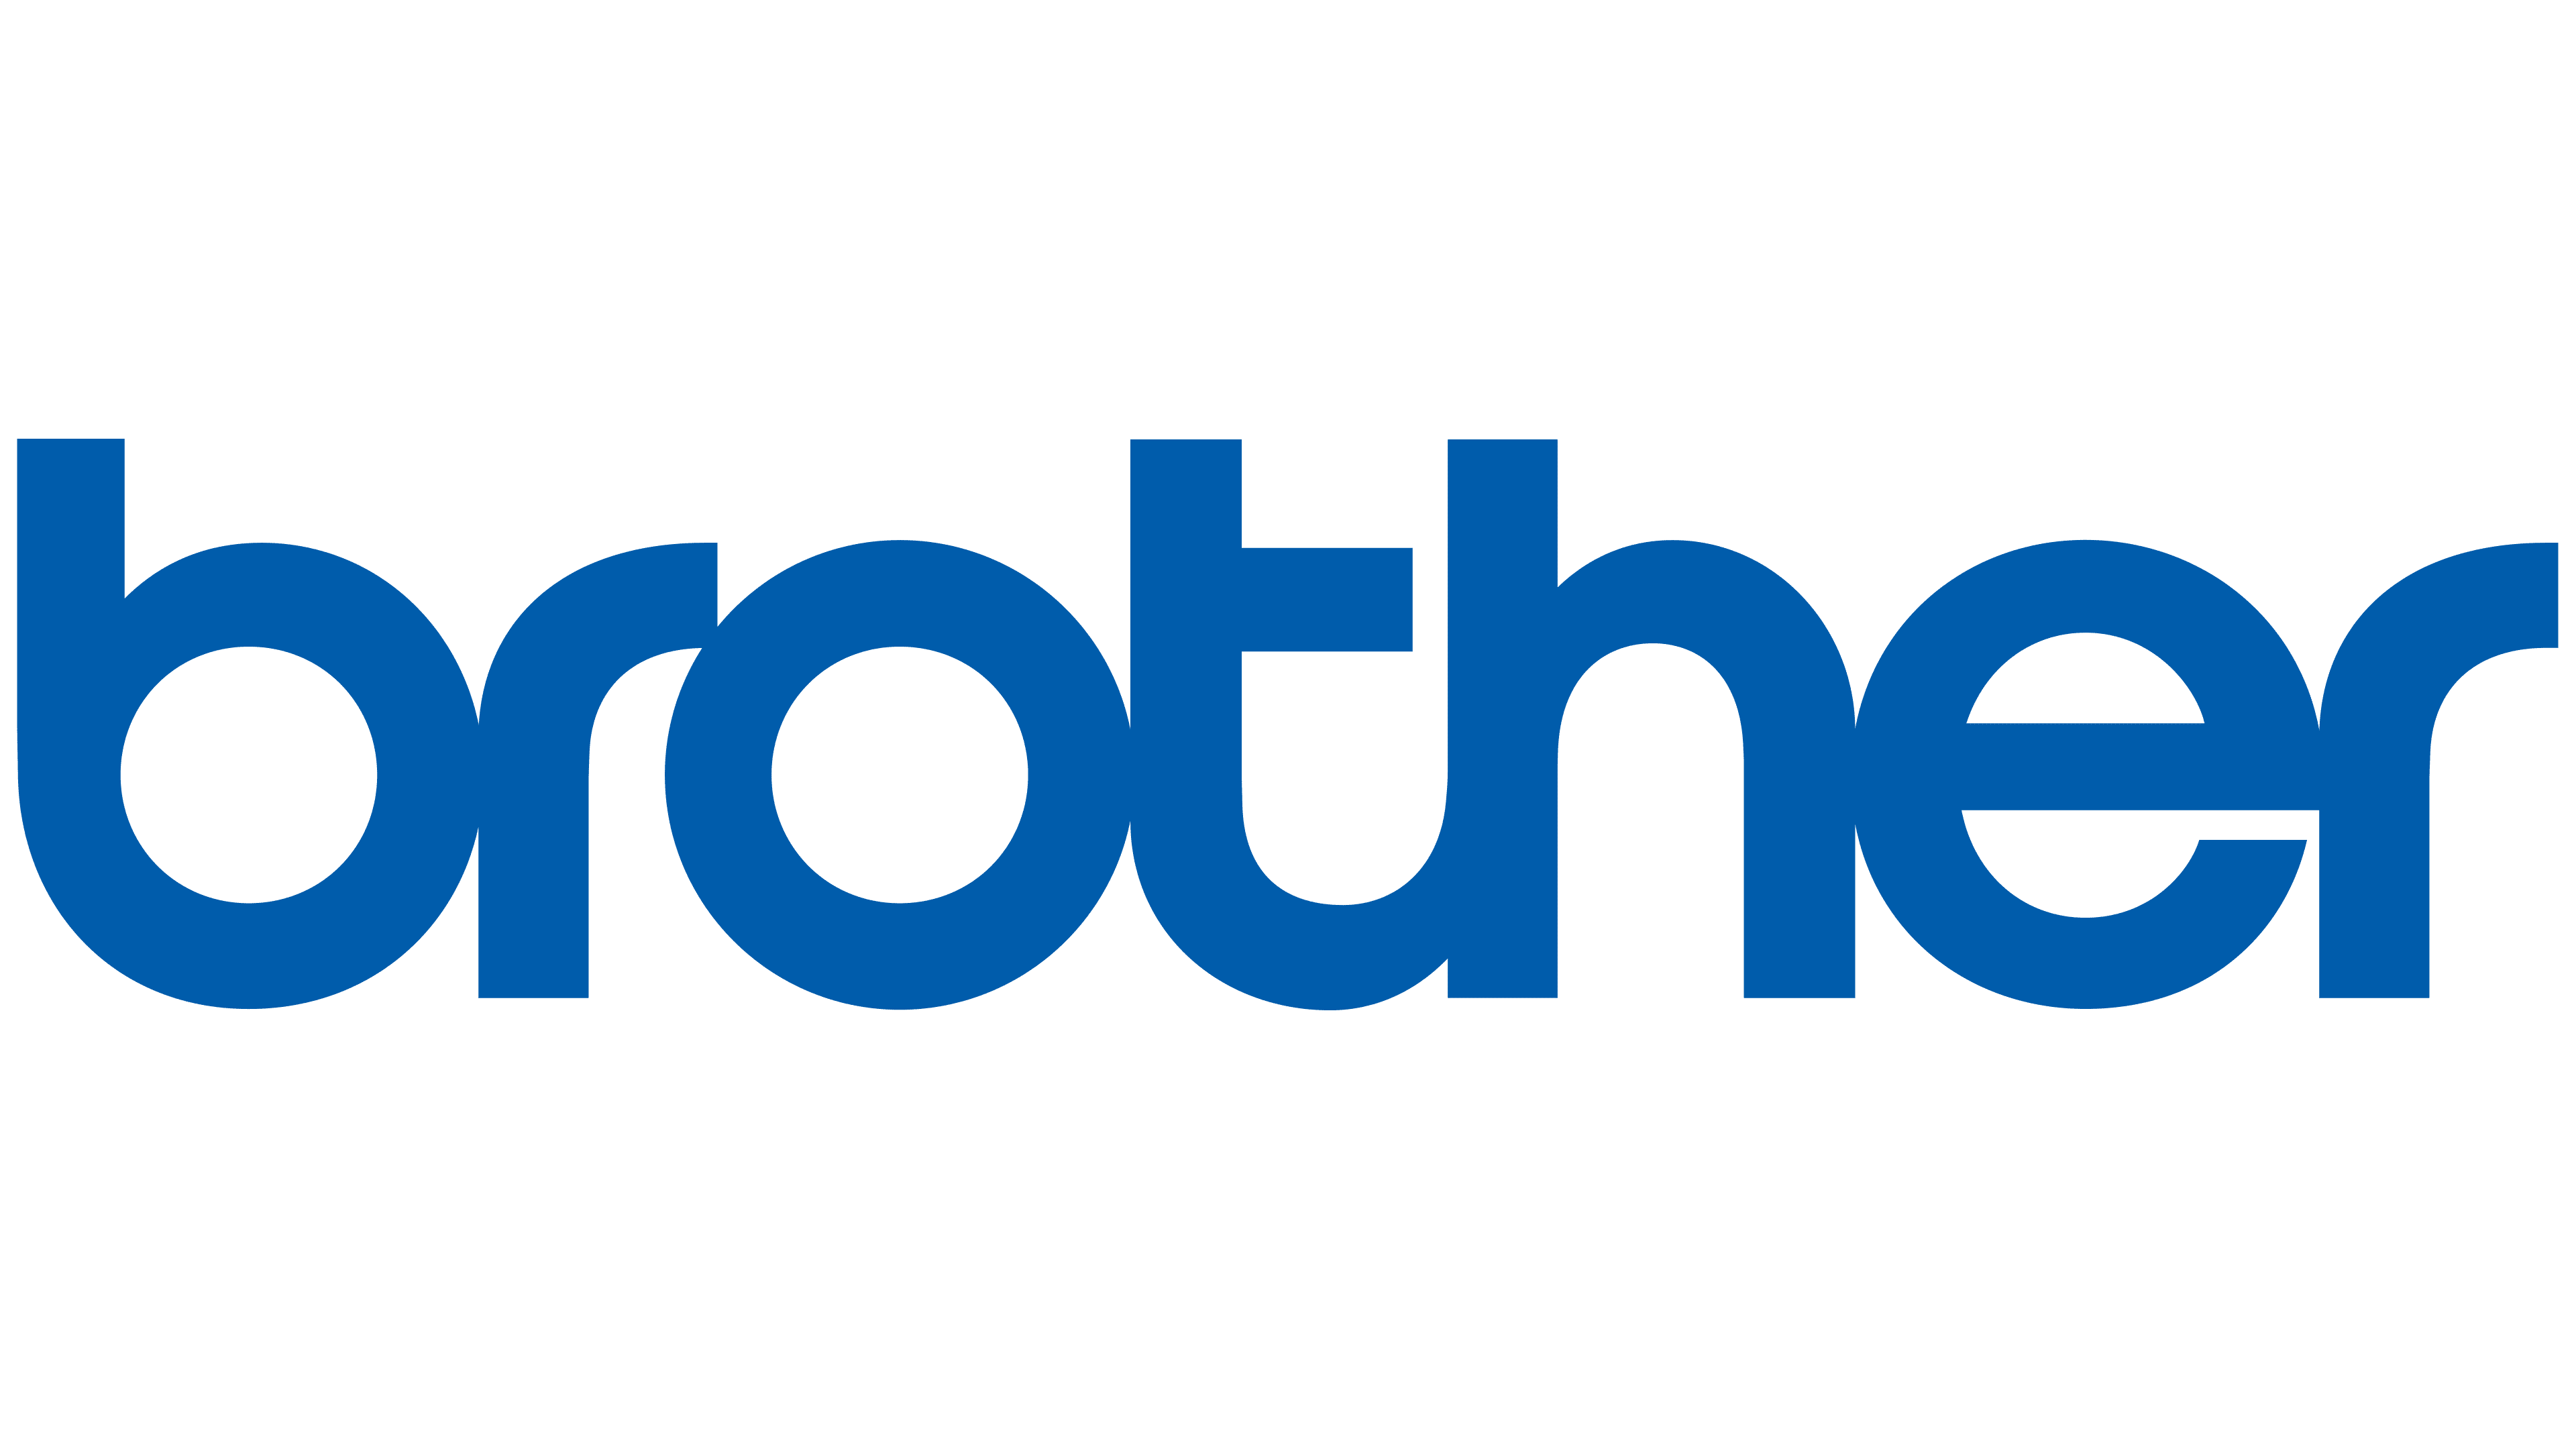 underjordisk Caius rytme Brother Logo, symbol, meaning, history, PNG, brand